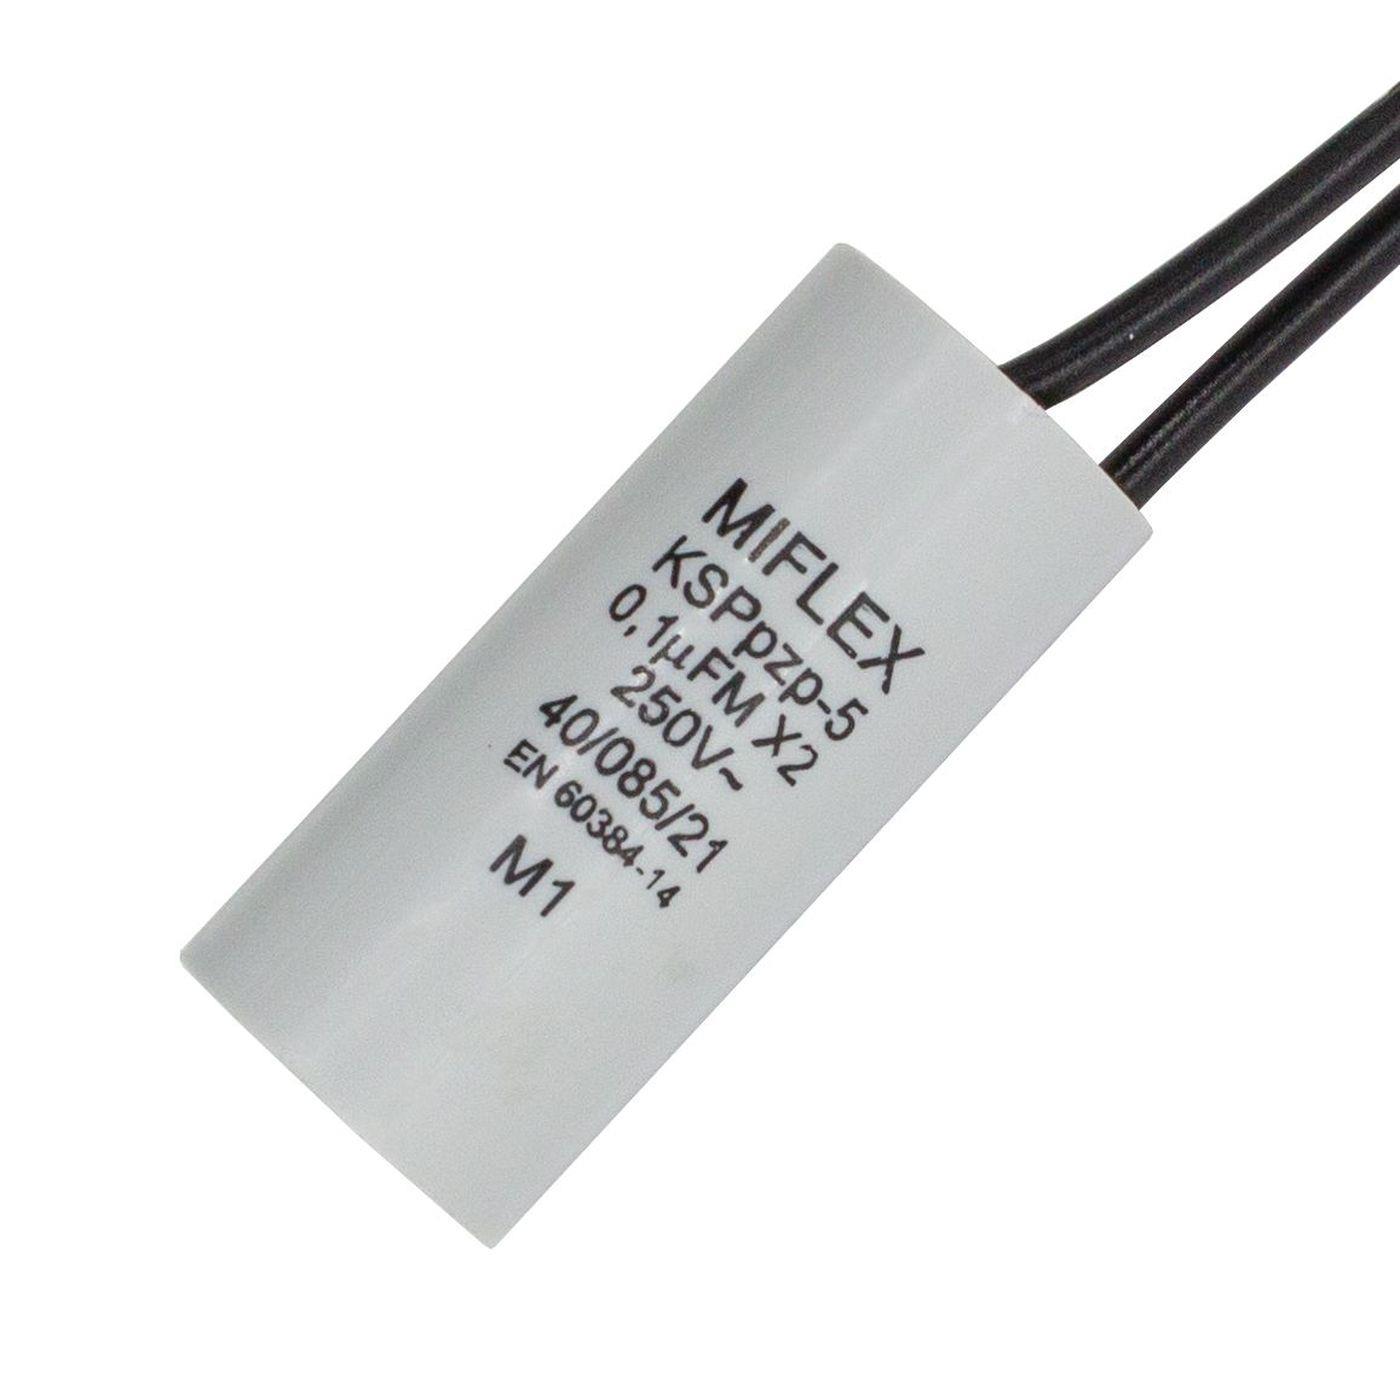 Interference suppression Capacitor Radial 0,1µF 250V 15x35mm